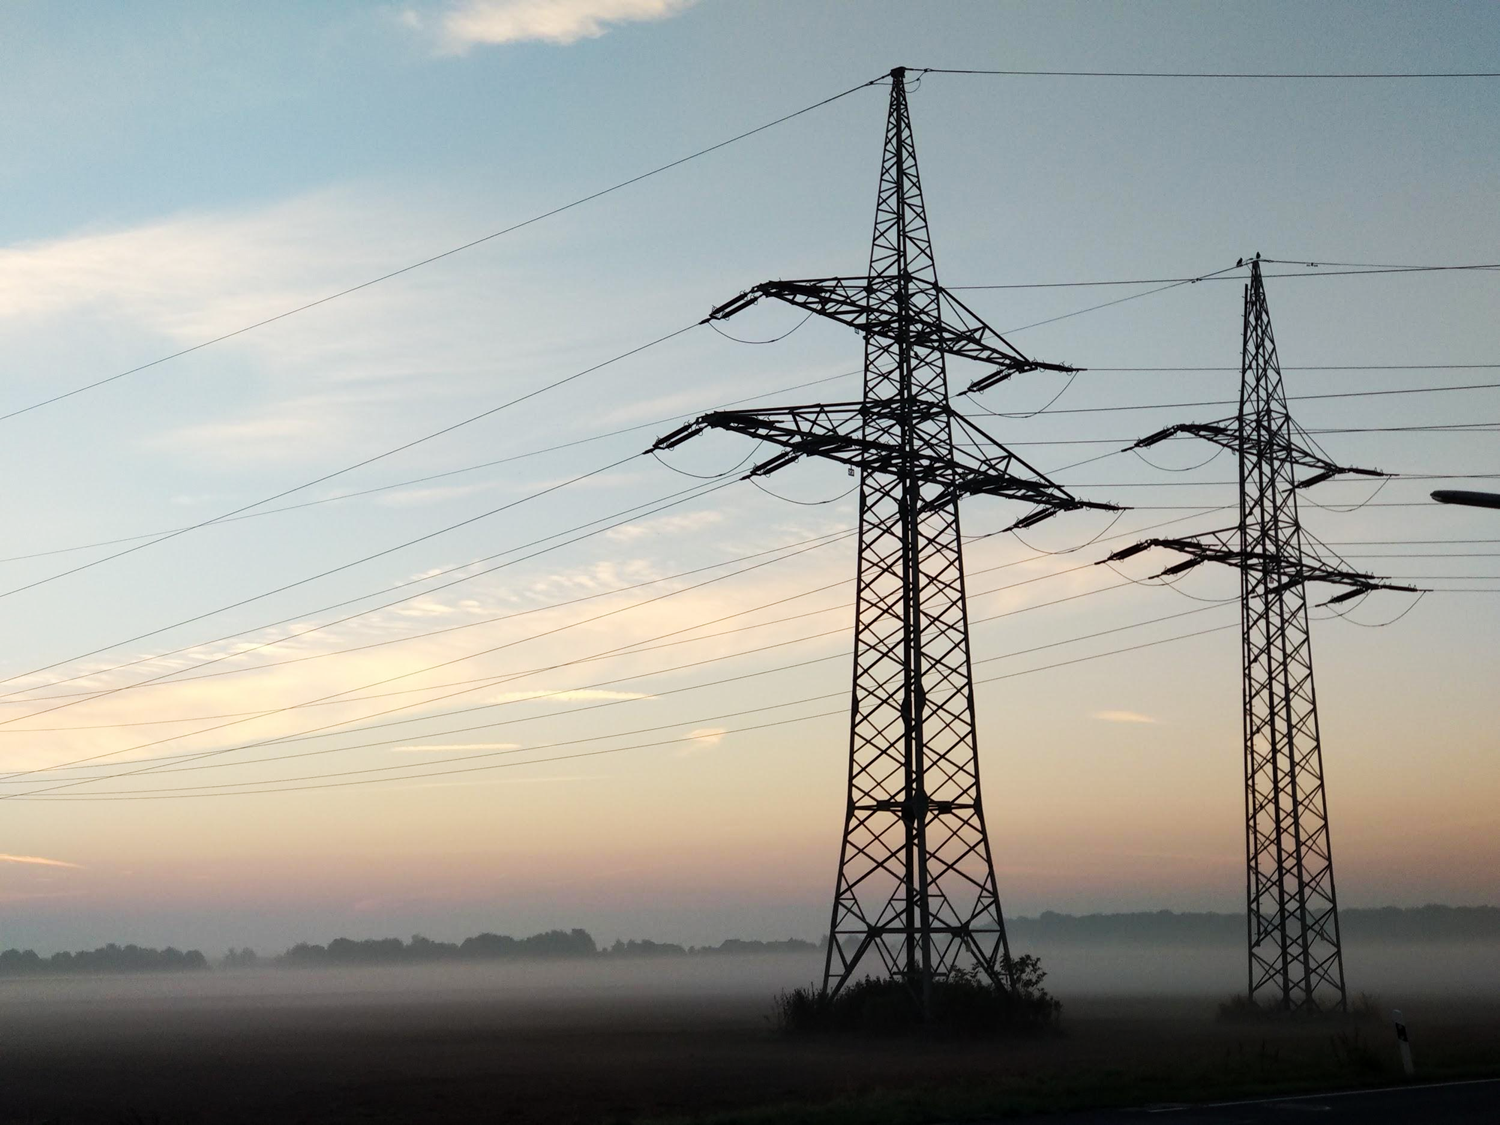 Two large electrical power lines with wires extending from the base based in a field. 